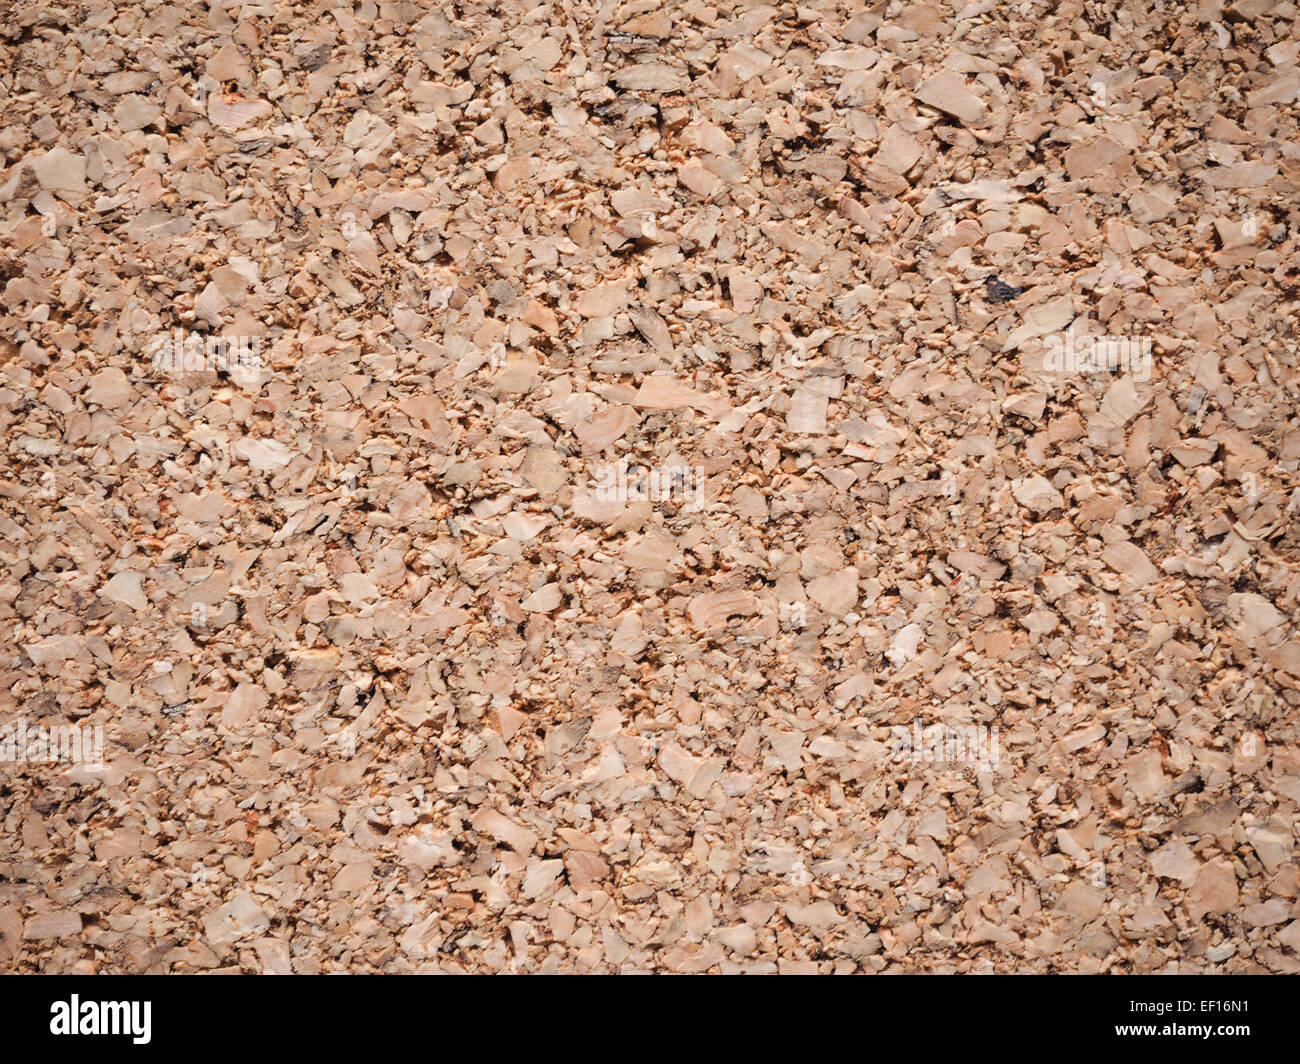 Cork material useful as a texture background Stock Photo